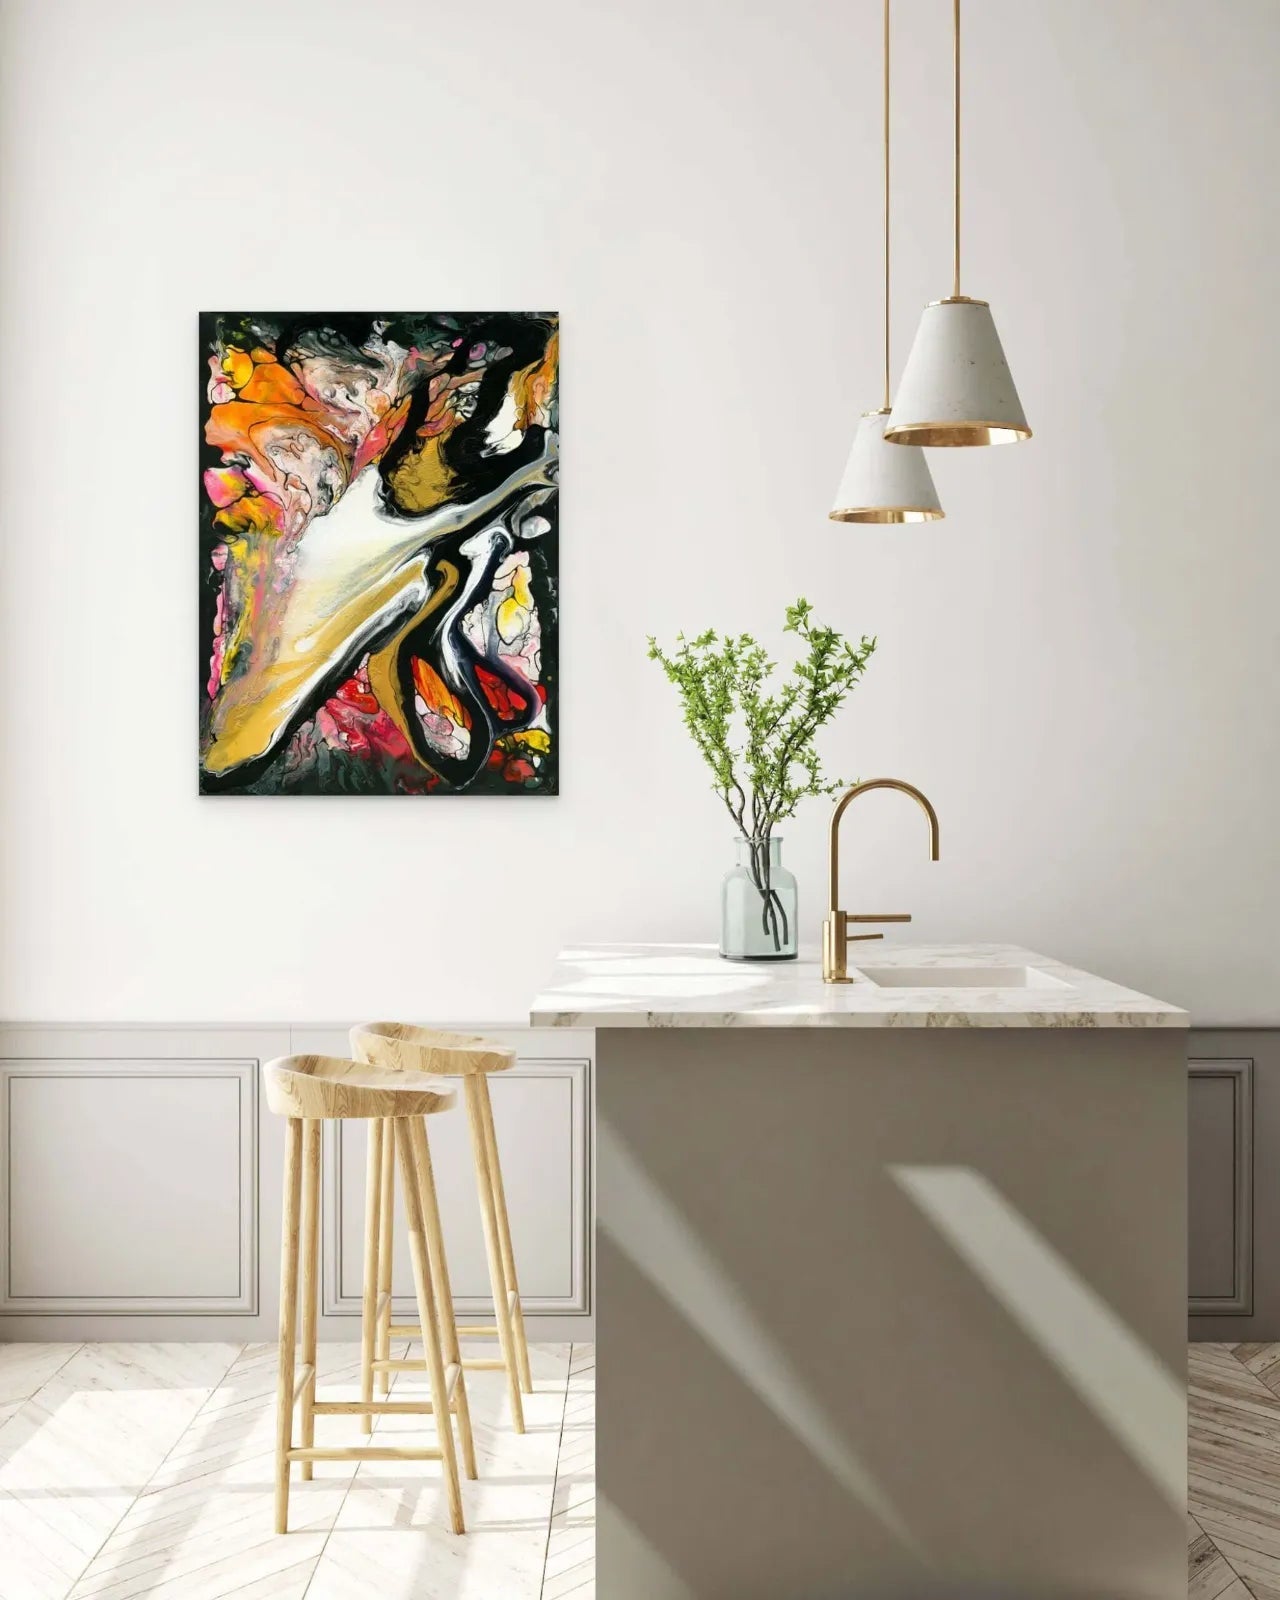 Abstract-Painting-by-Sung-Lee-Nature-Series-Artwork-Kitchen-Chromaluxe-Limited-Edition-Print